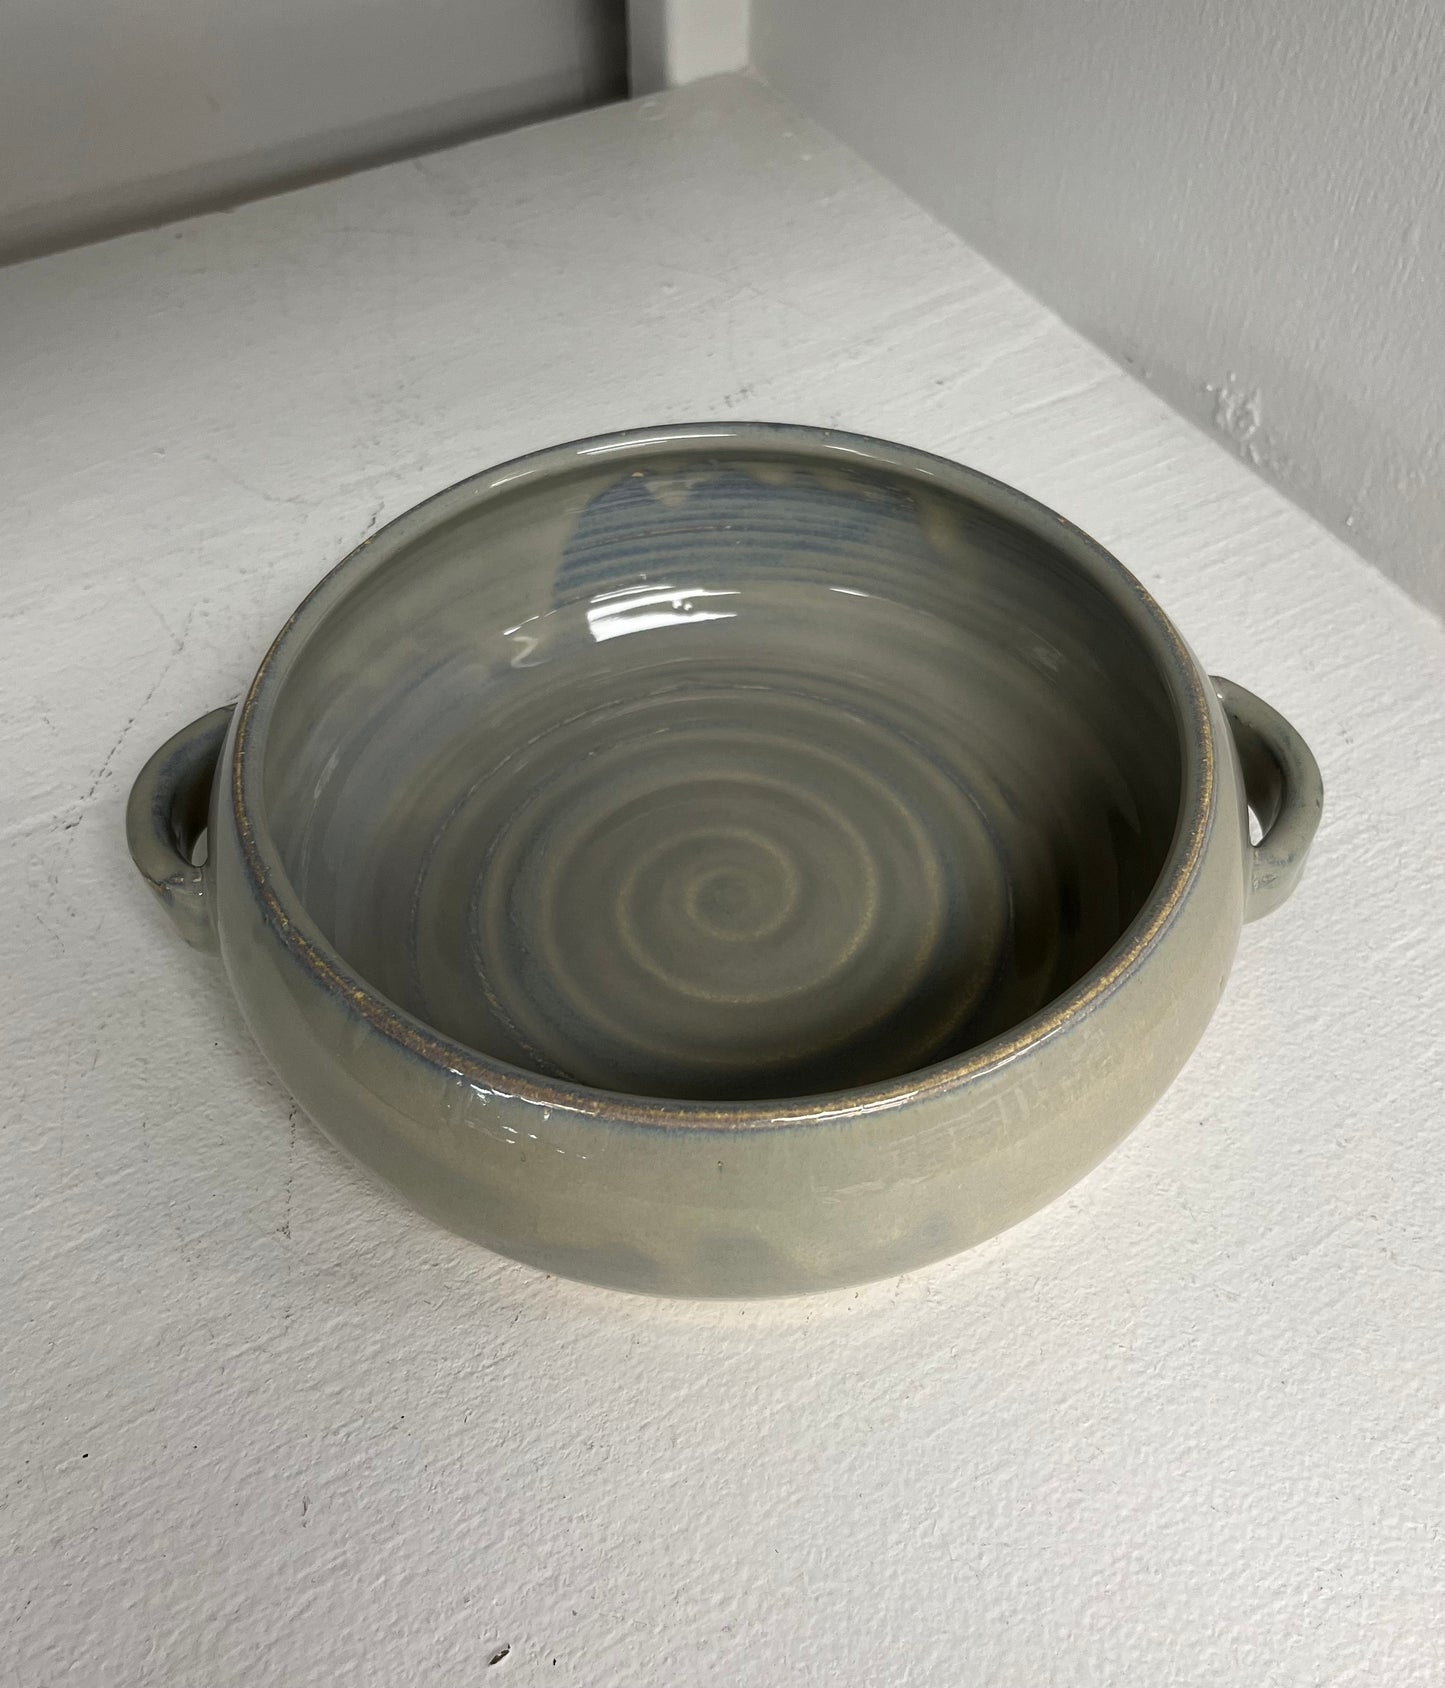 FP Shallow Bowls in Morning Mist